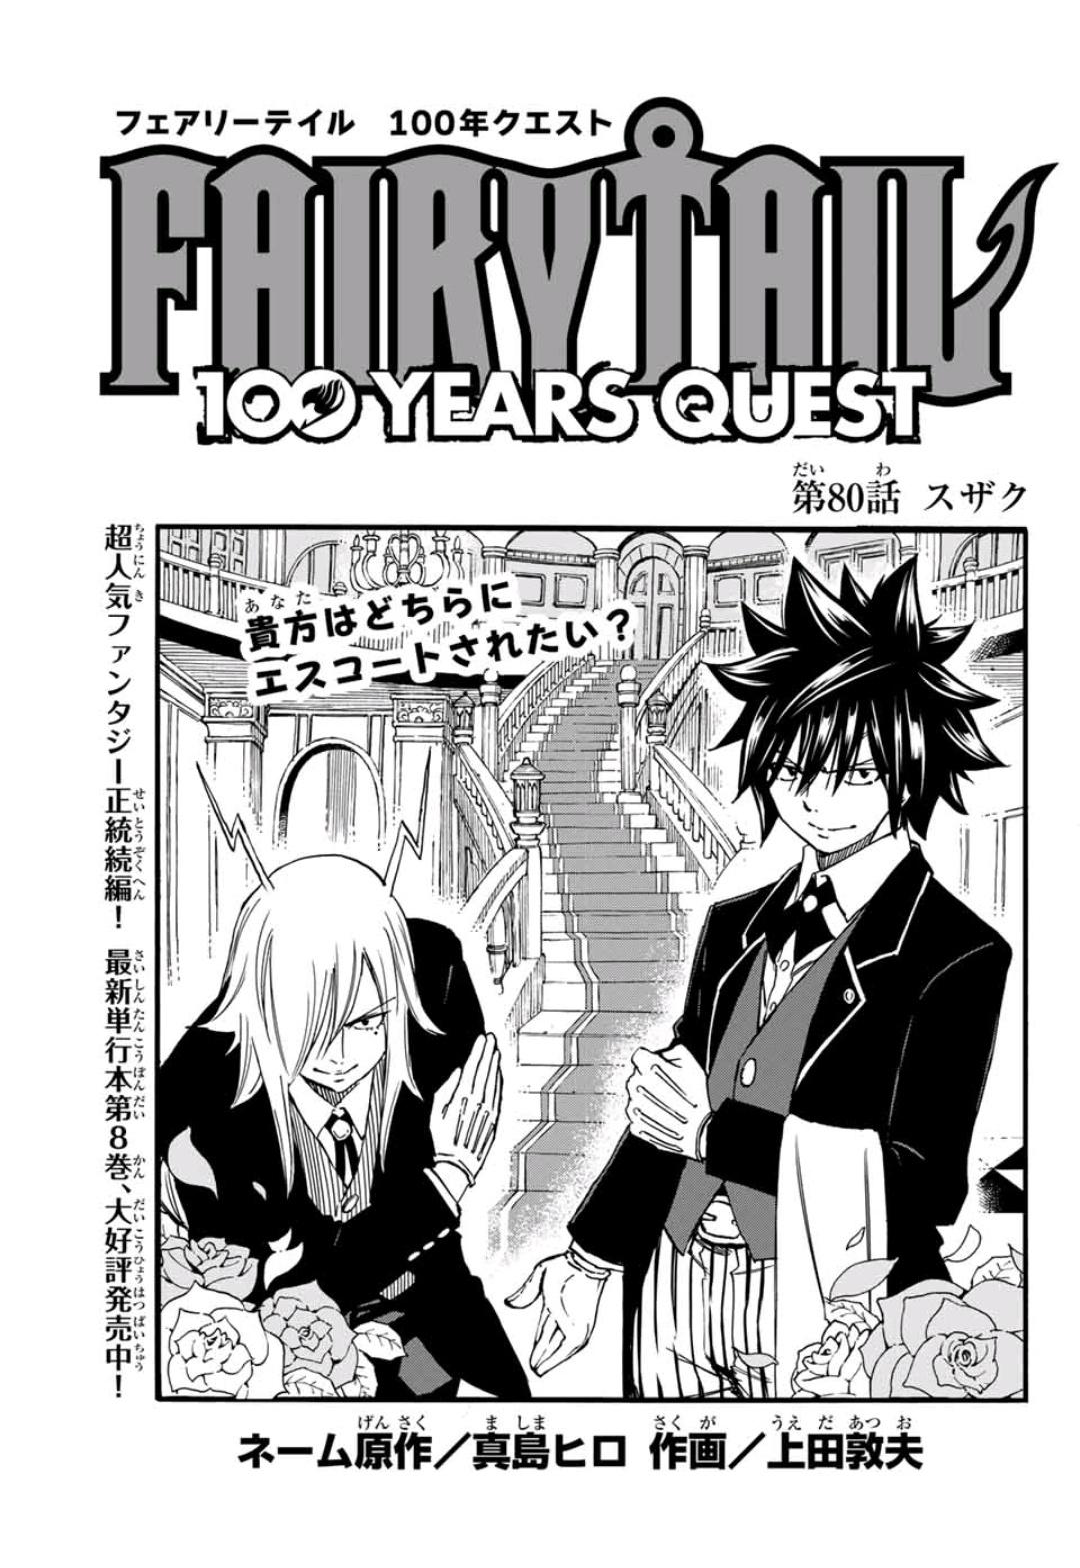 Fairy Tail: 100 Years Quest Chapter 80 | Fairy Tail Wiki | Fandom